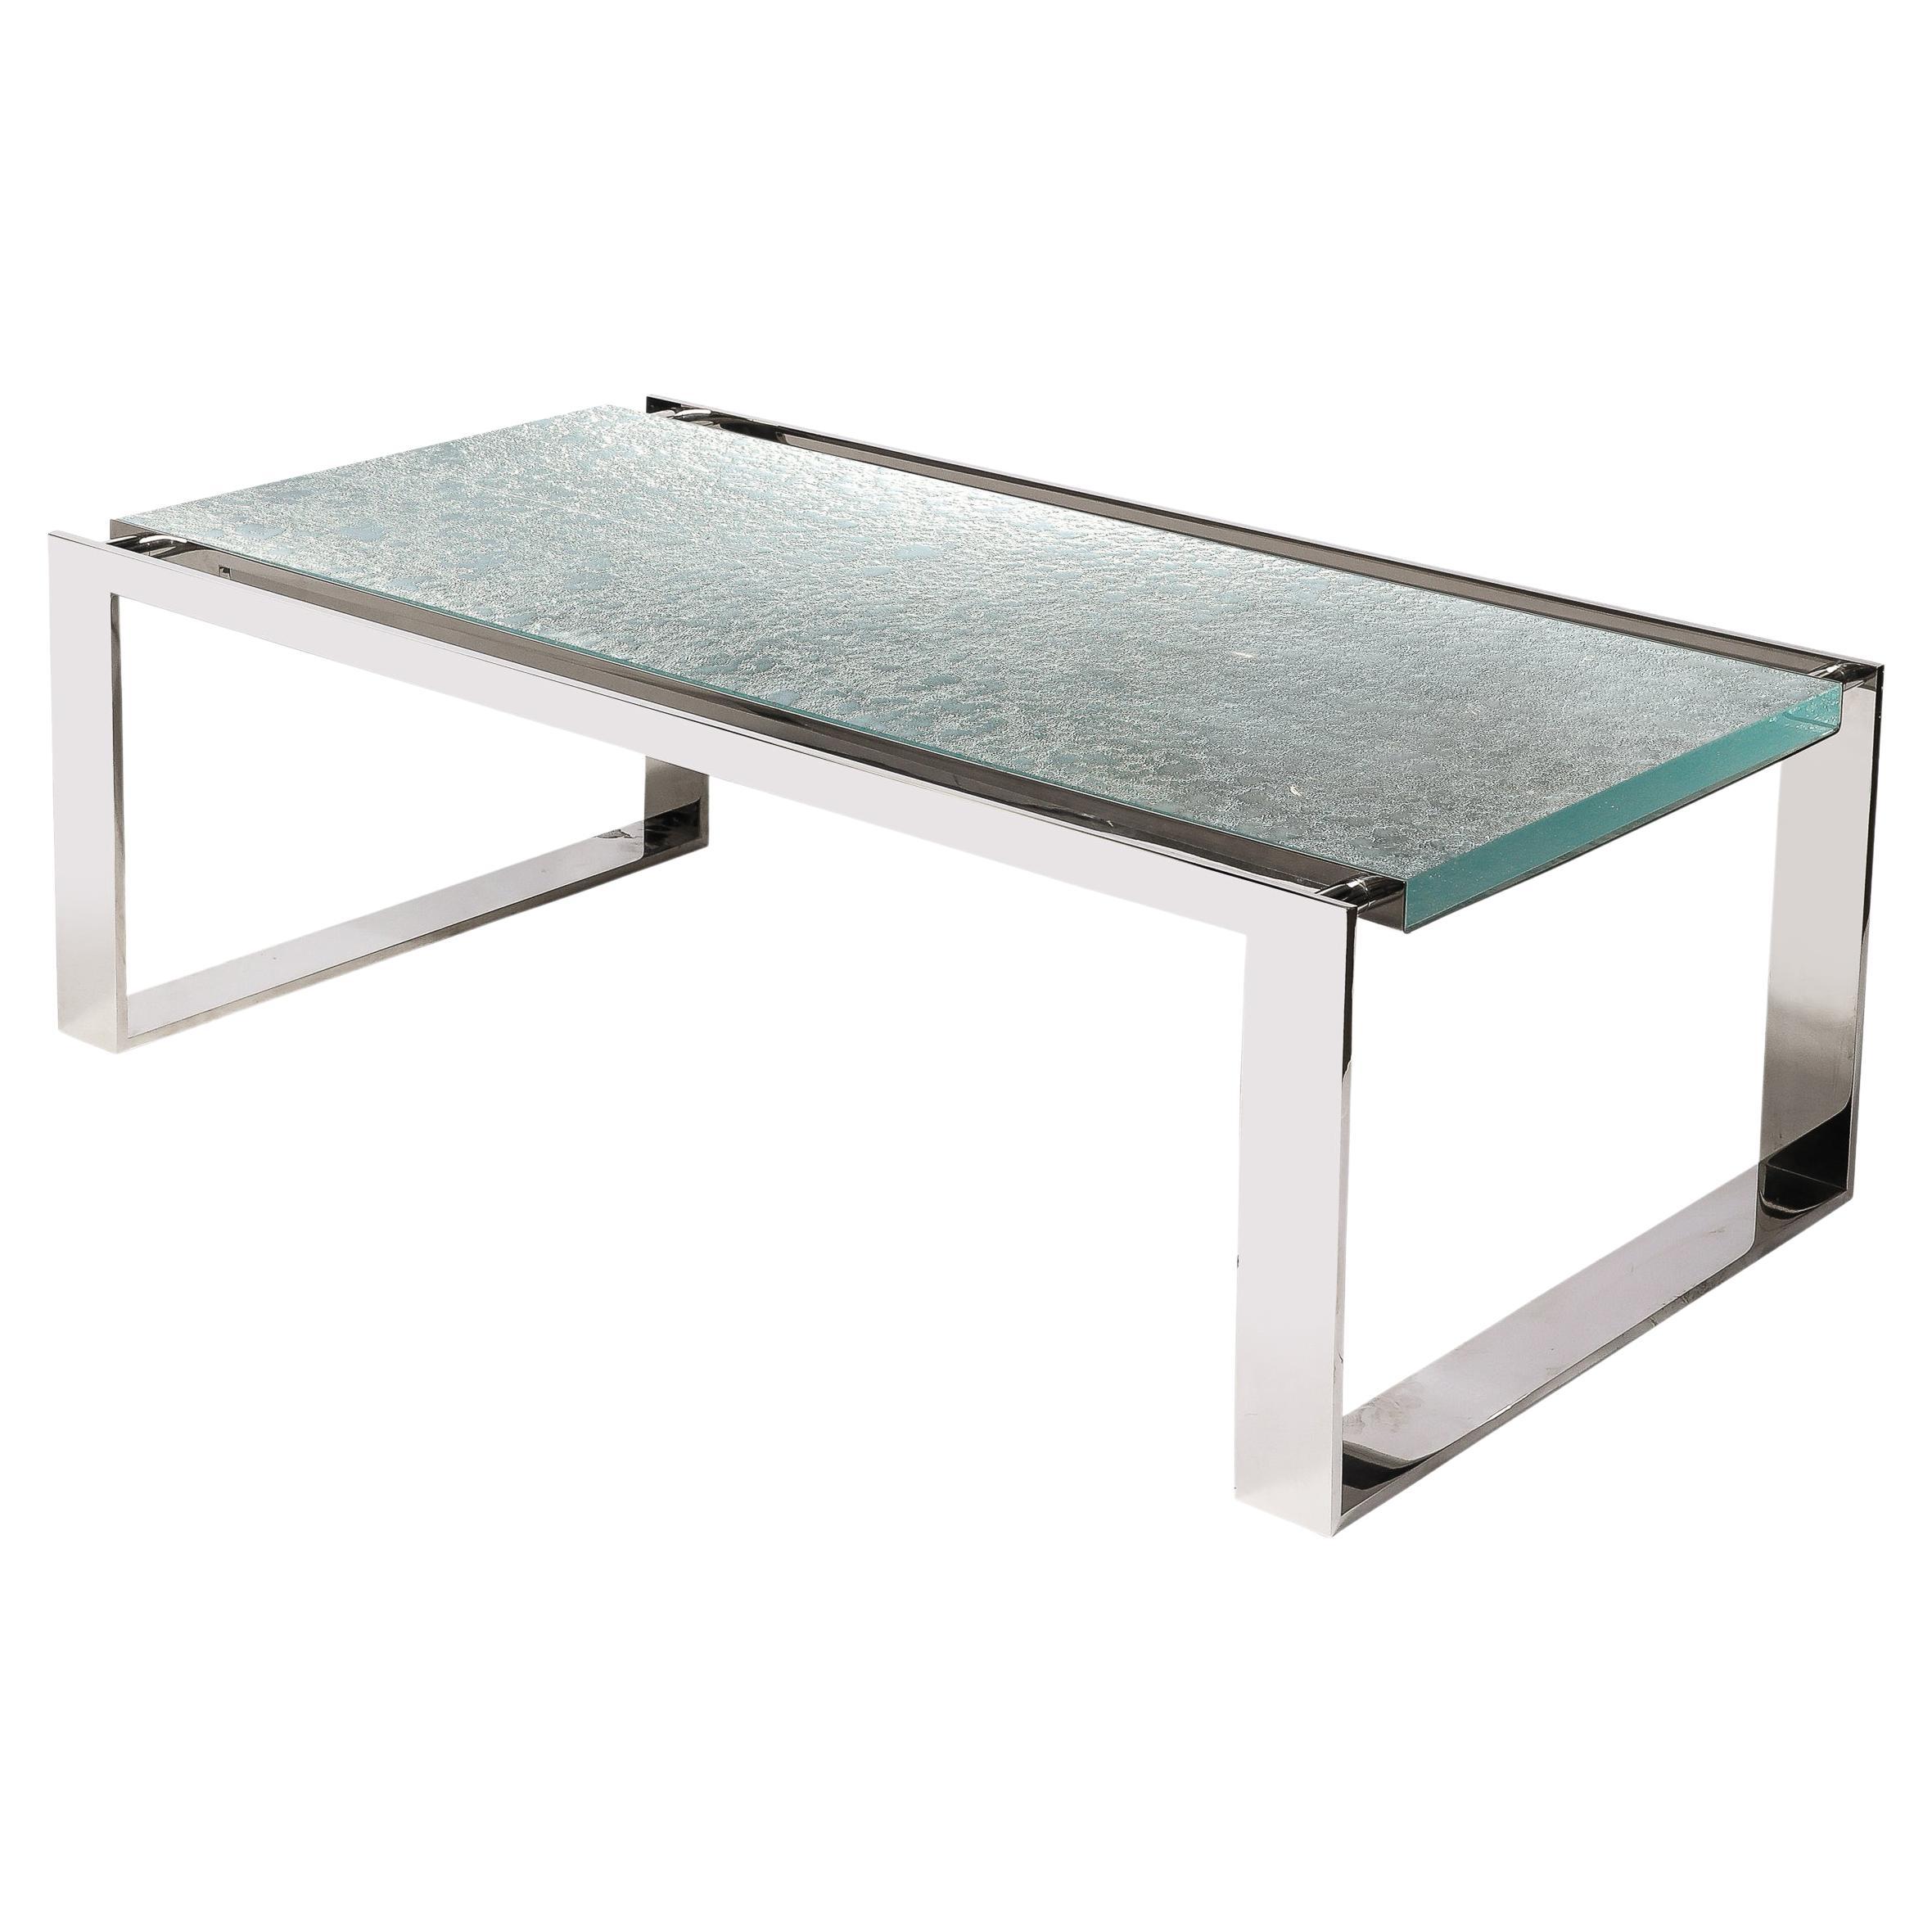 Modernist Nickel  and Lucite Glacial Cocktail Table by Lorin Marsh